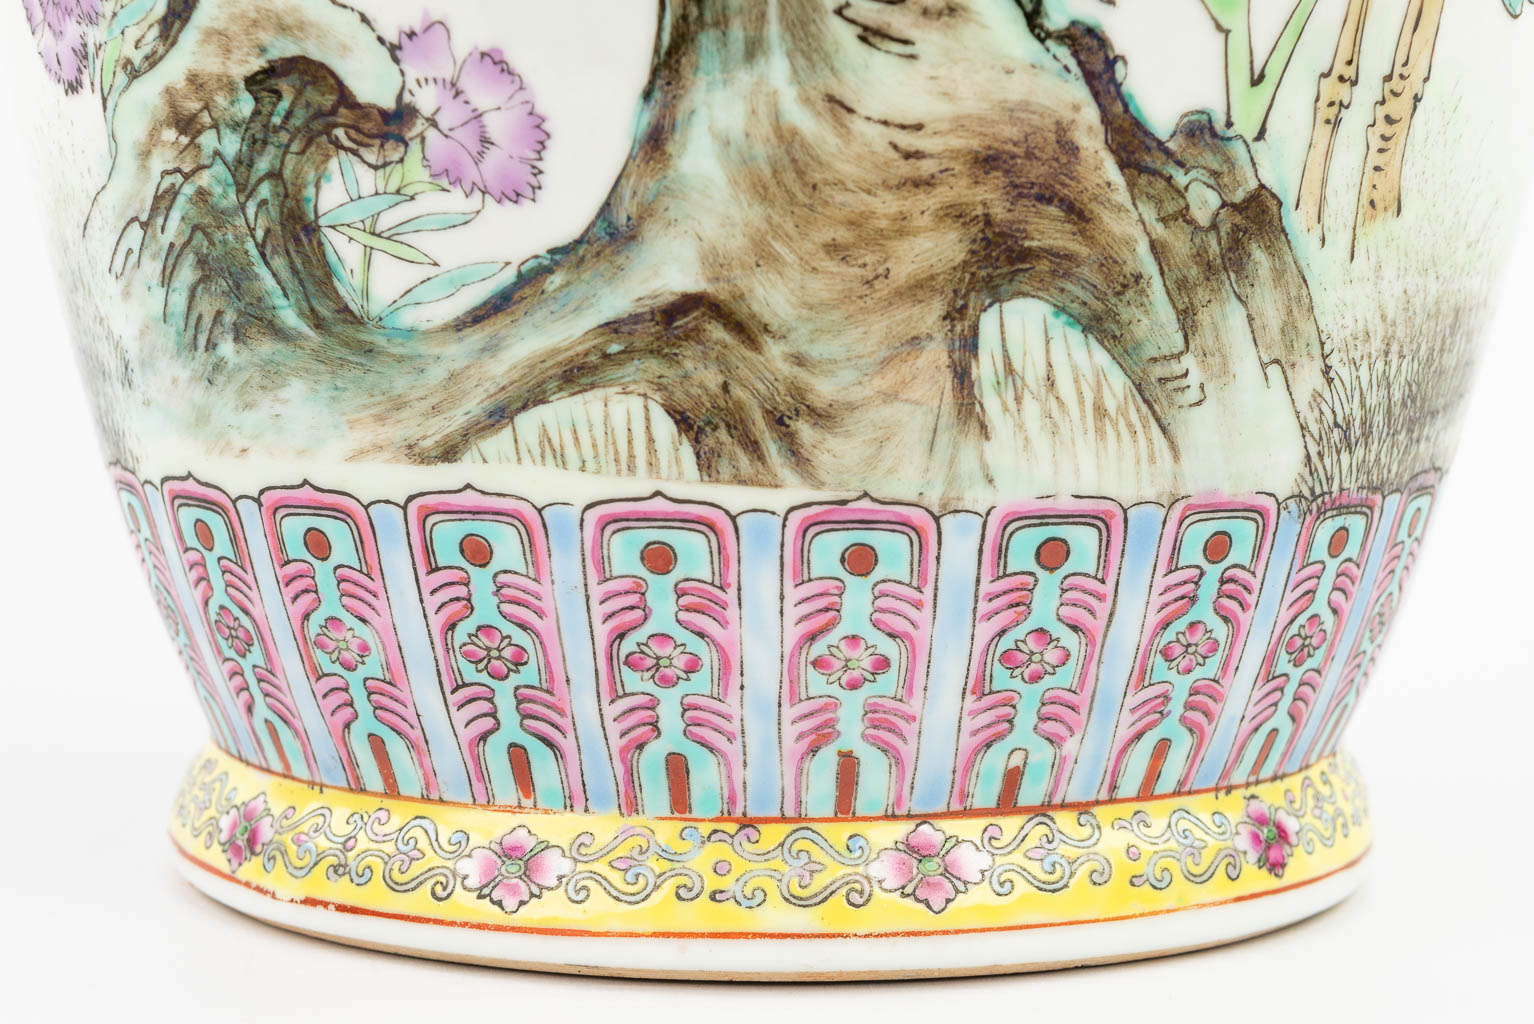 A Chinese vase made of porcelain and decorated with peacocks. (H: 60,5 cm)